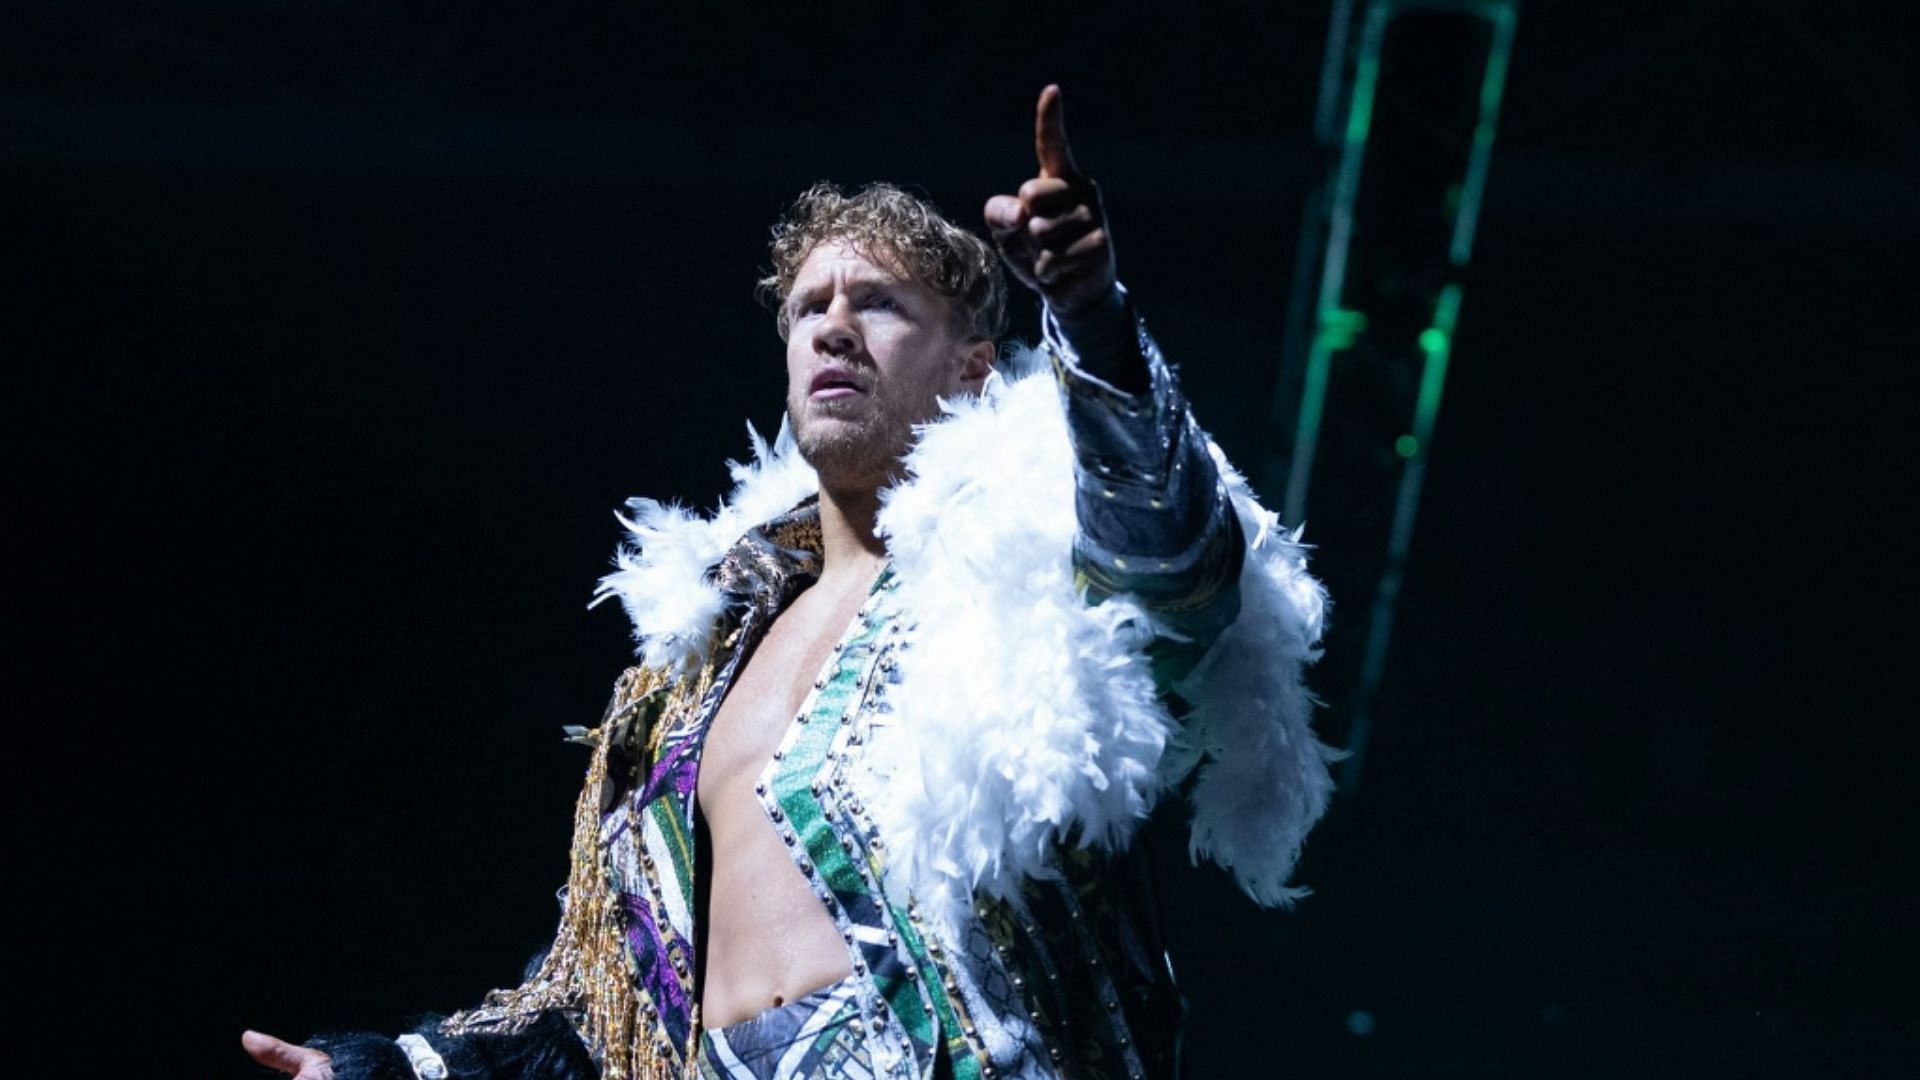 Will Ospreay signed with AEW in 2023 [Image Credits: Ospreay